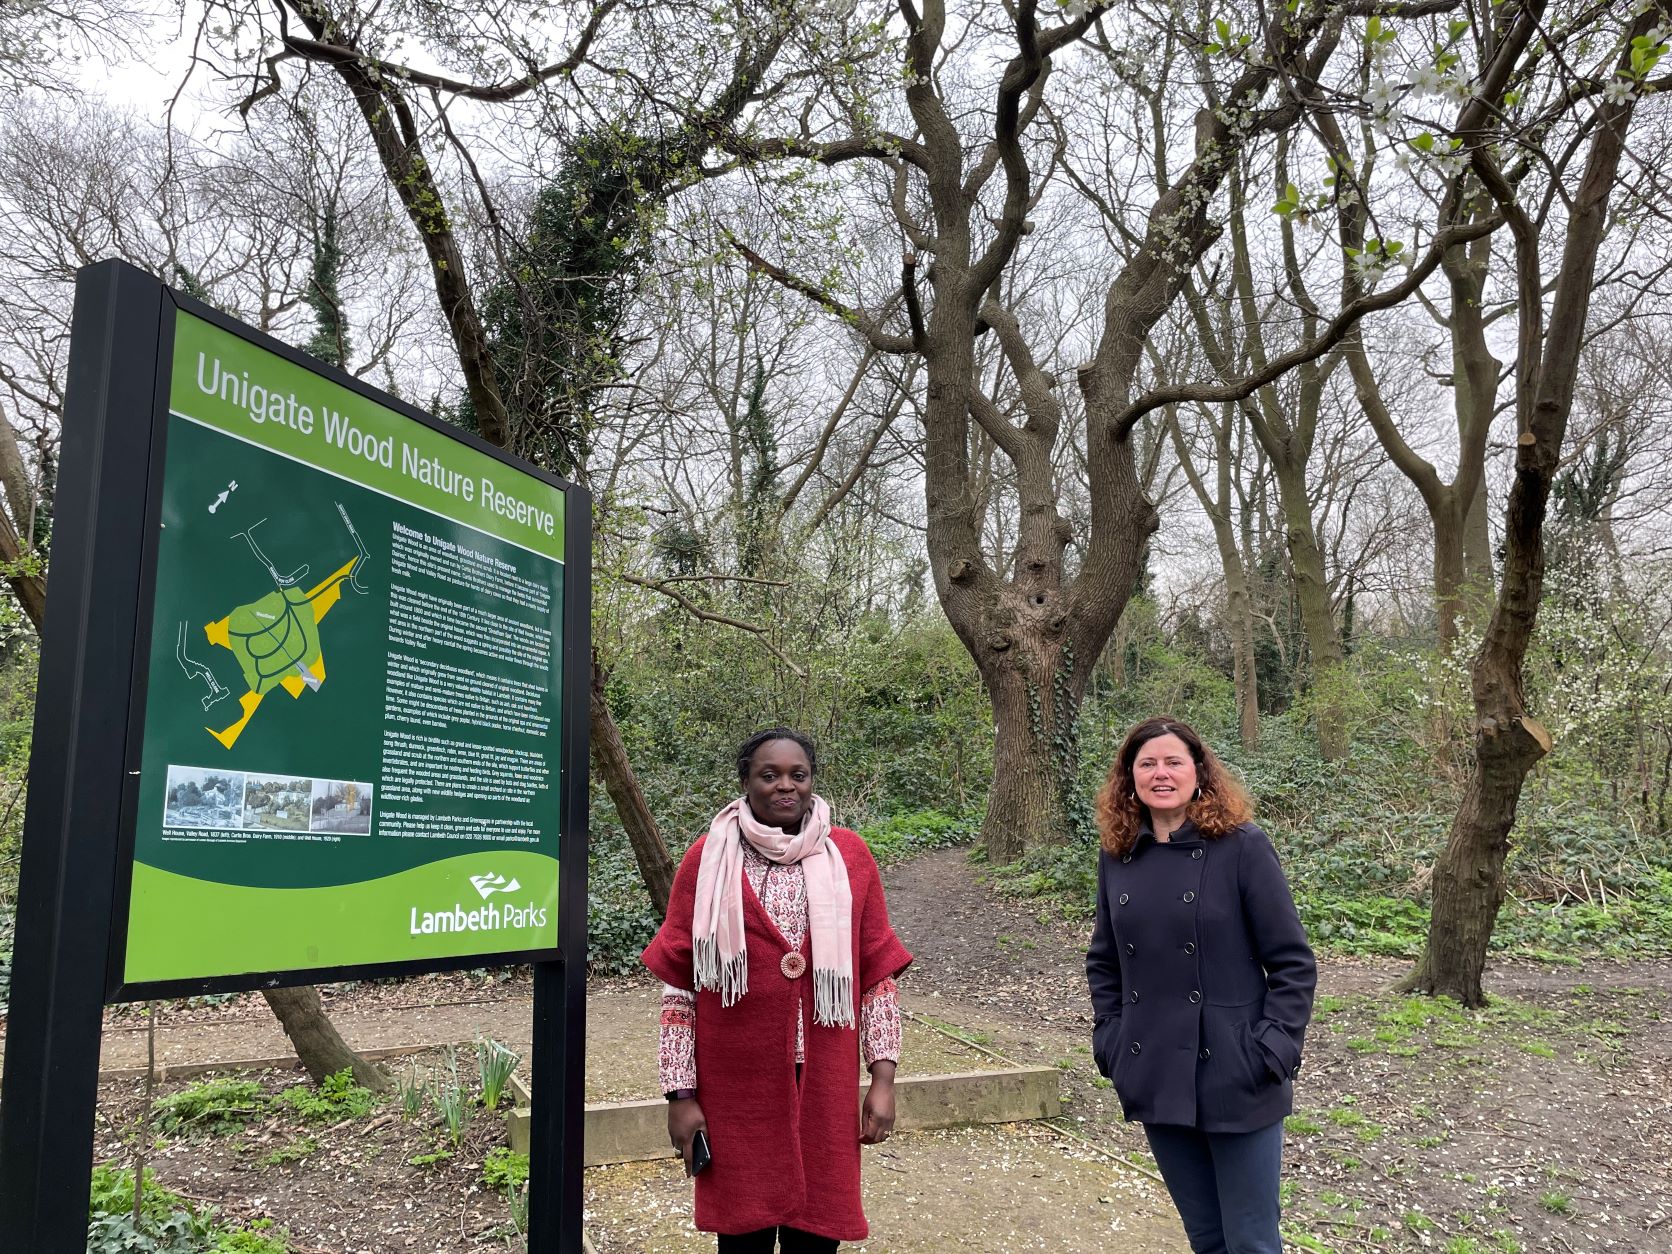 New Local Nature Reserves for Lambeth giving everyone one access to nature